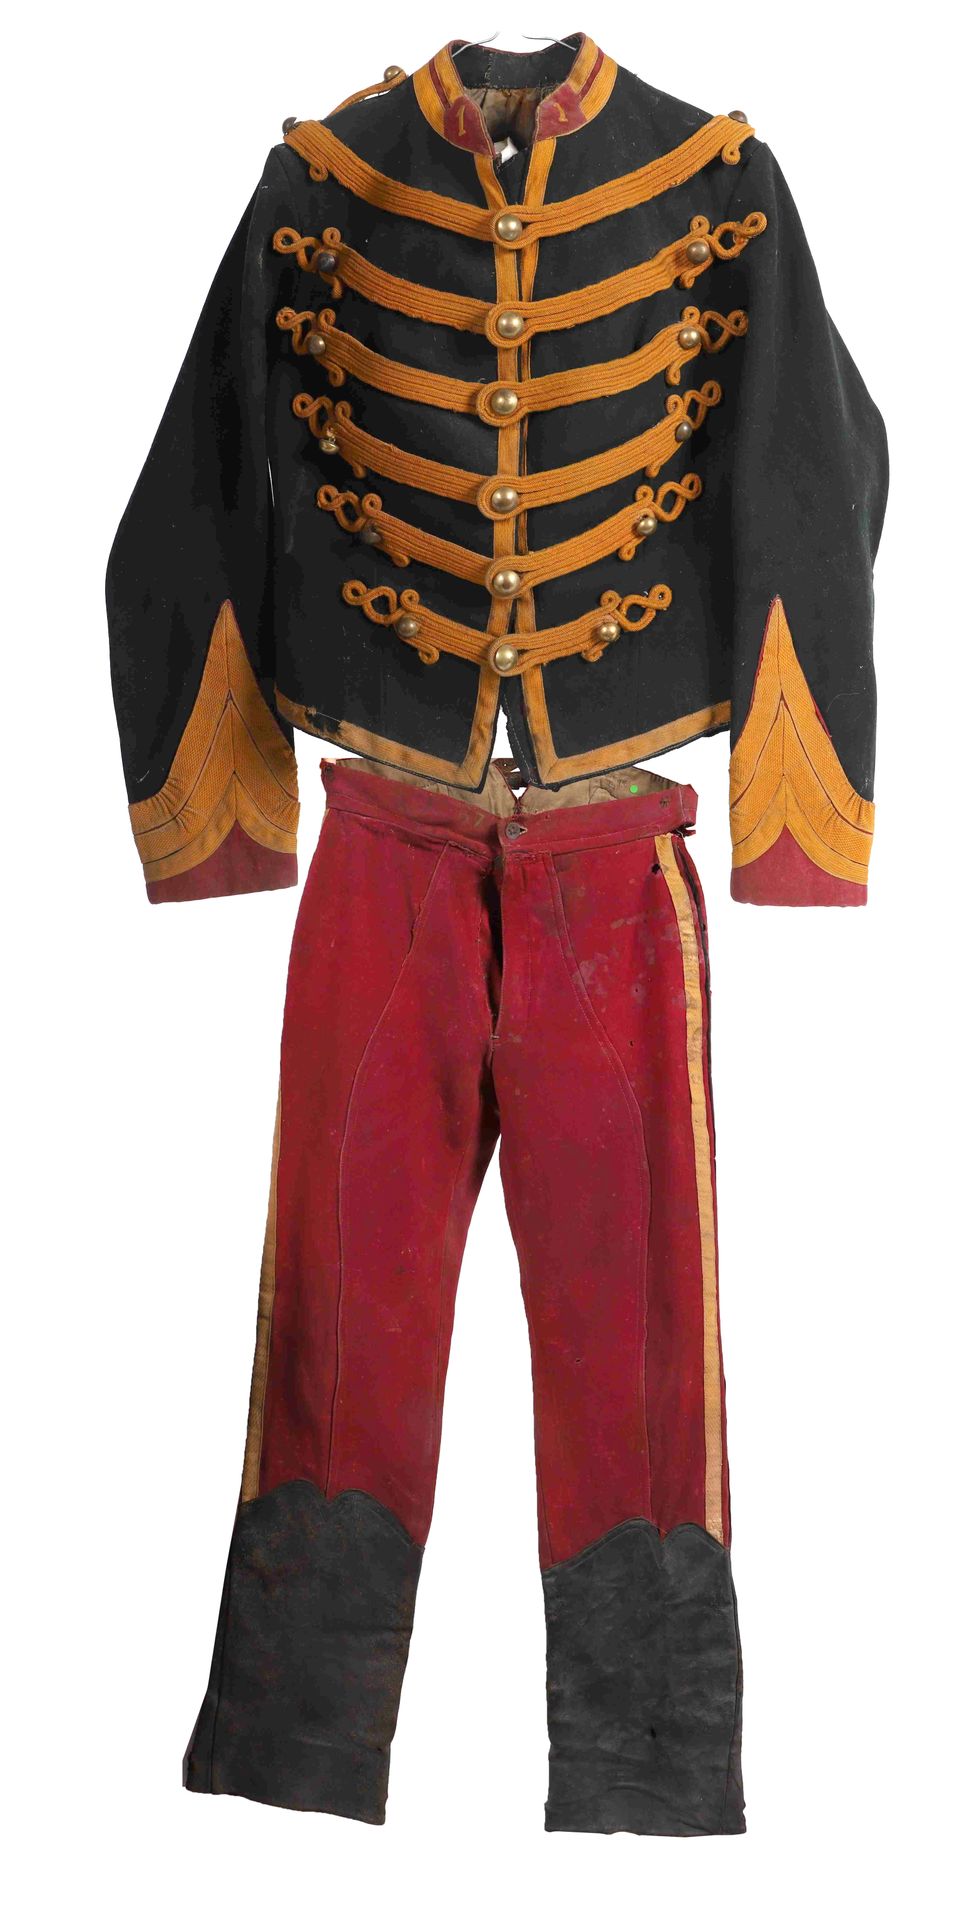 Null Dolman and Brigadier pants of the Ist Regiment of Guides

1900

Belgium